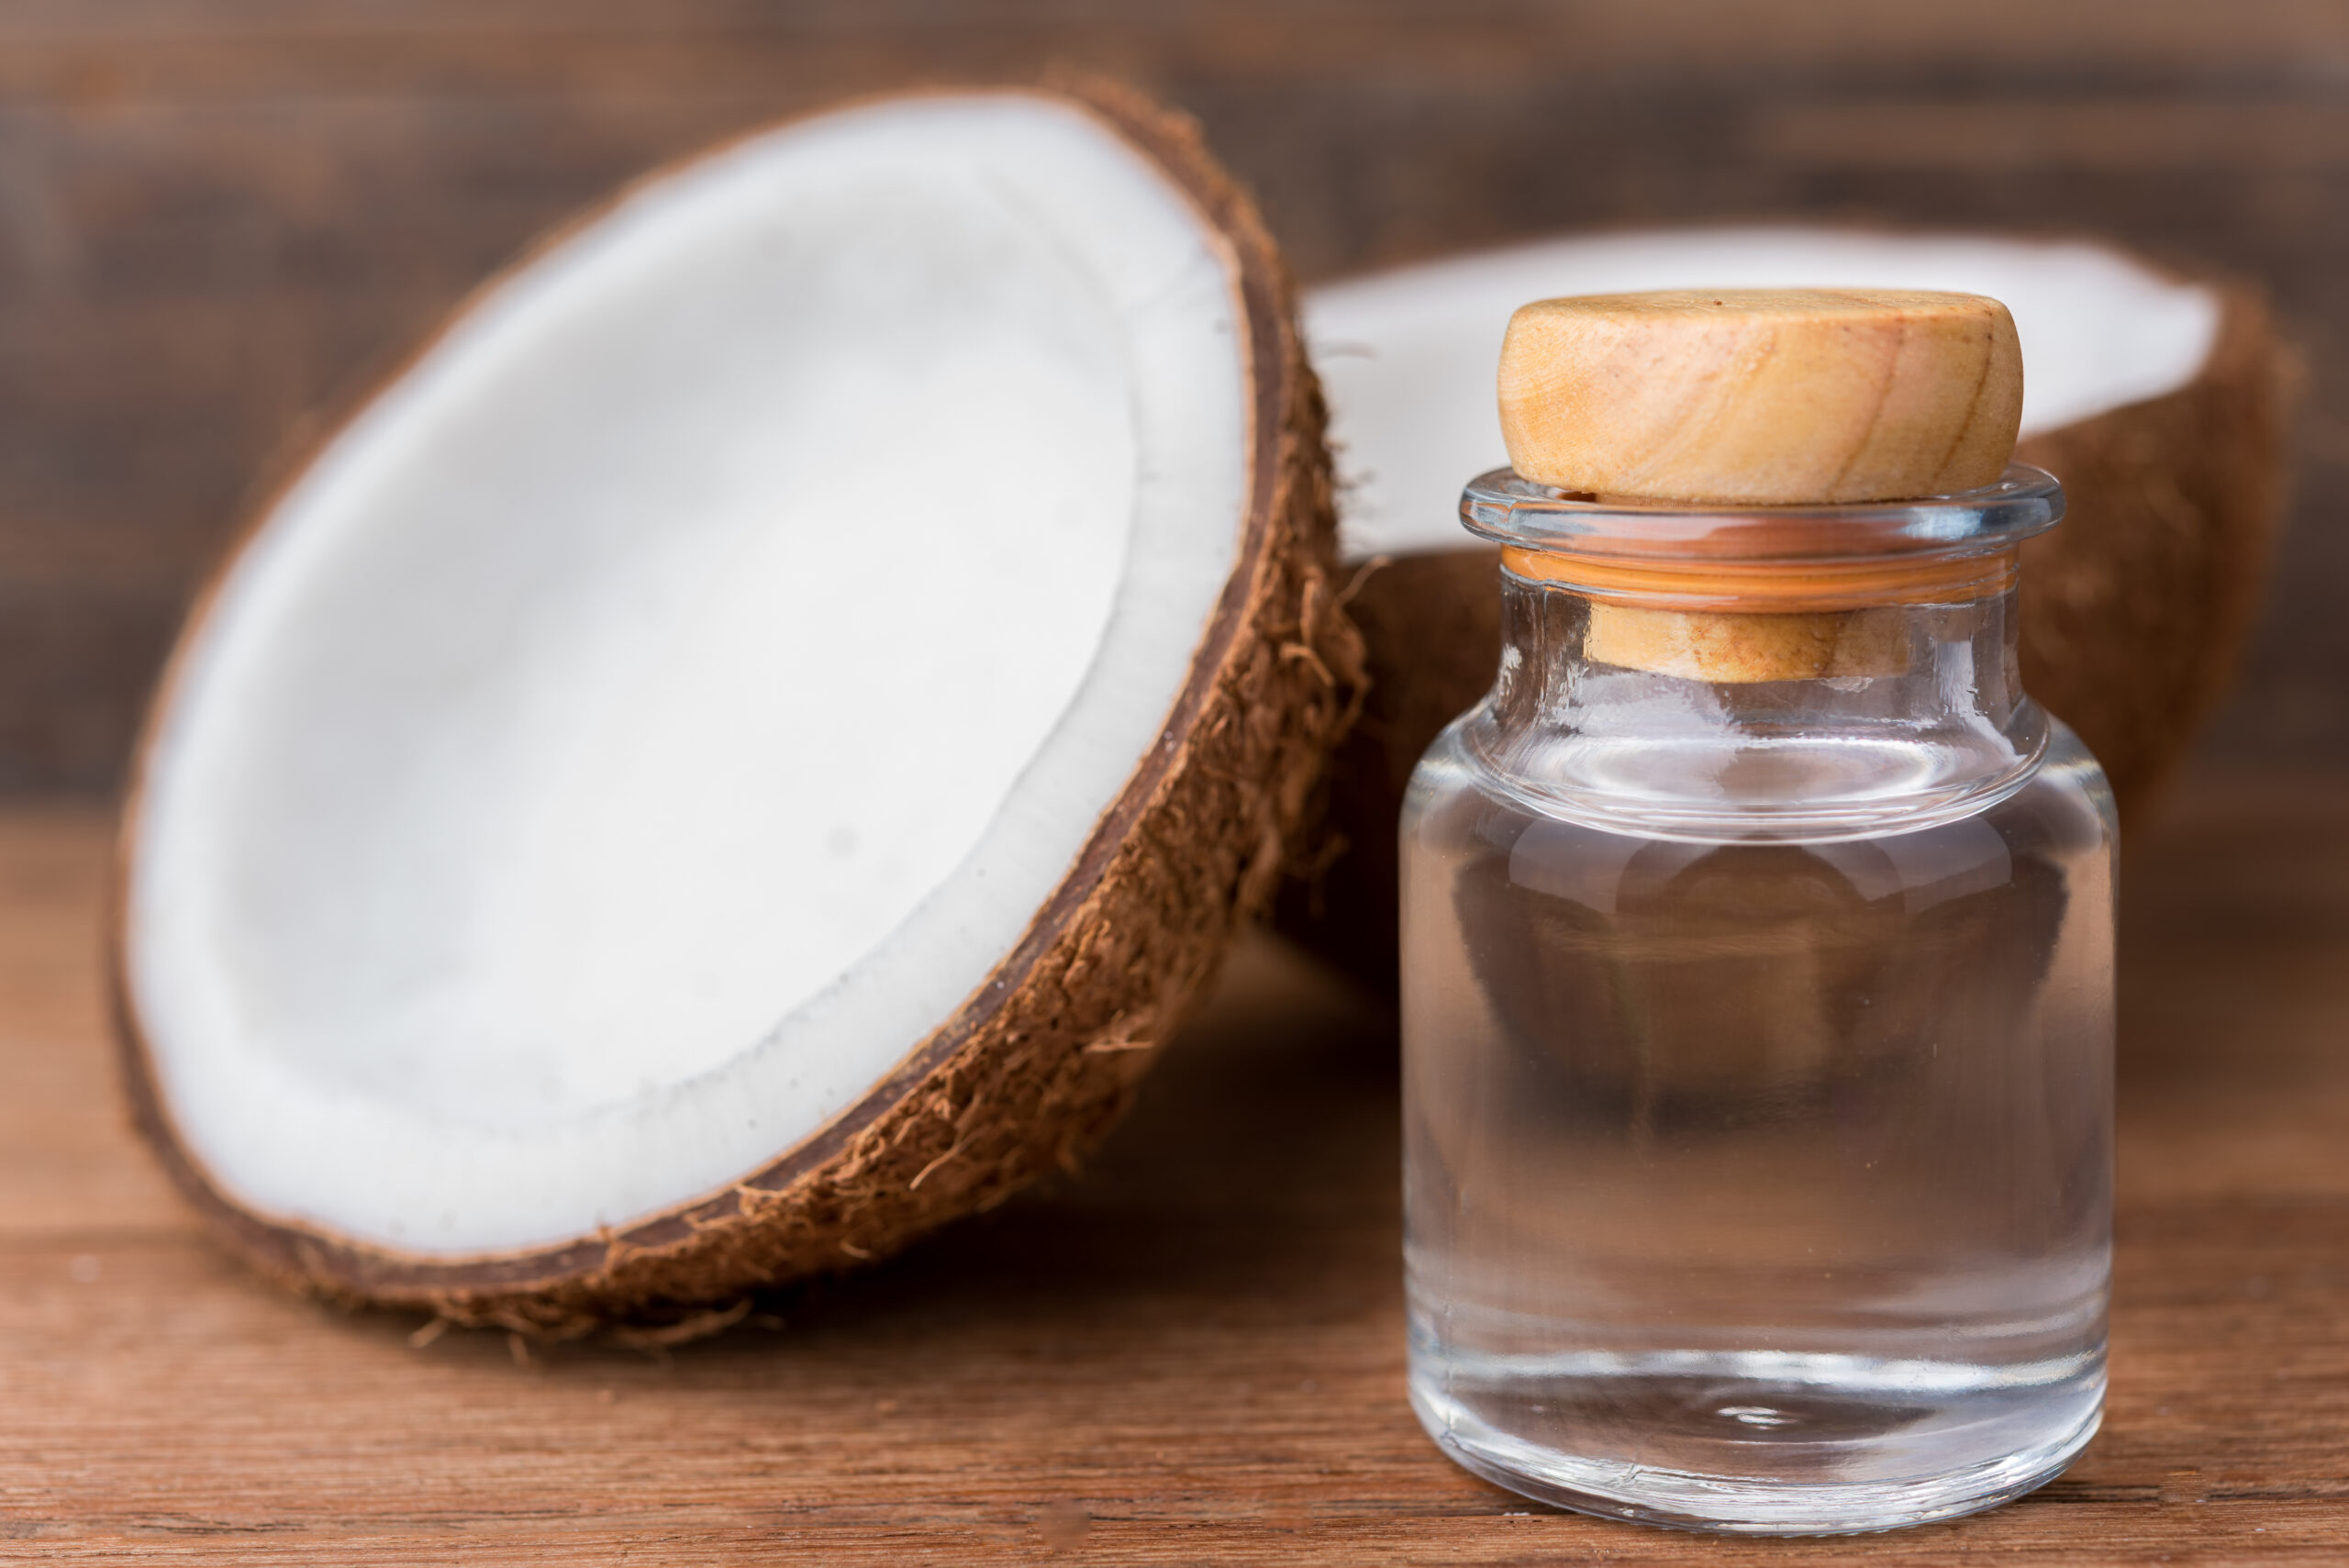 One of the best oils to use for oil pulling is coconut oil